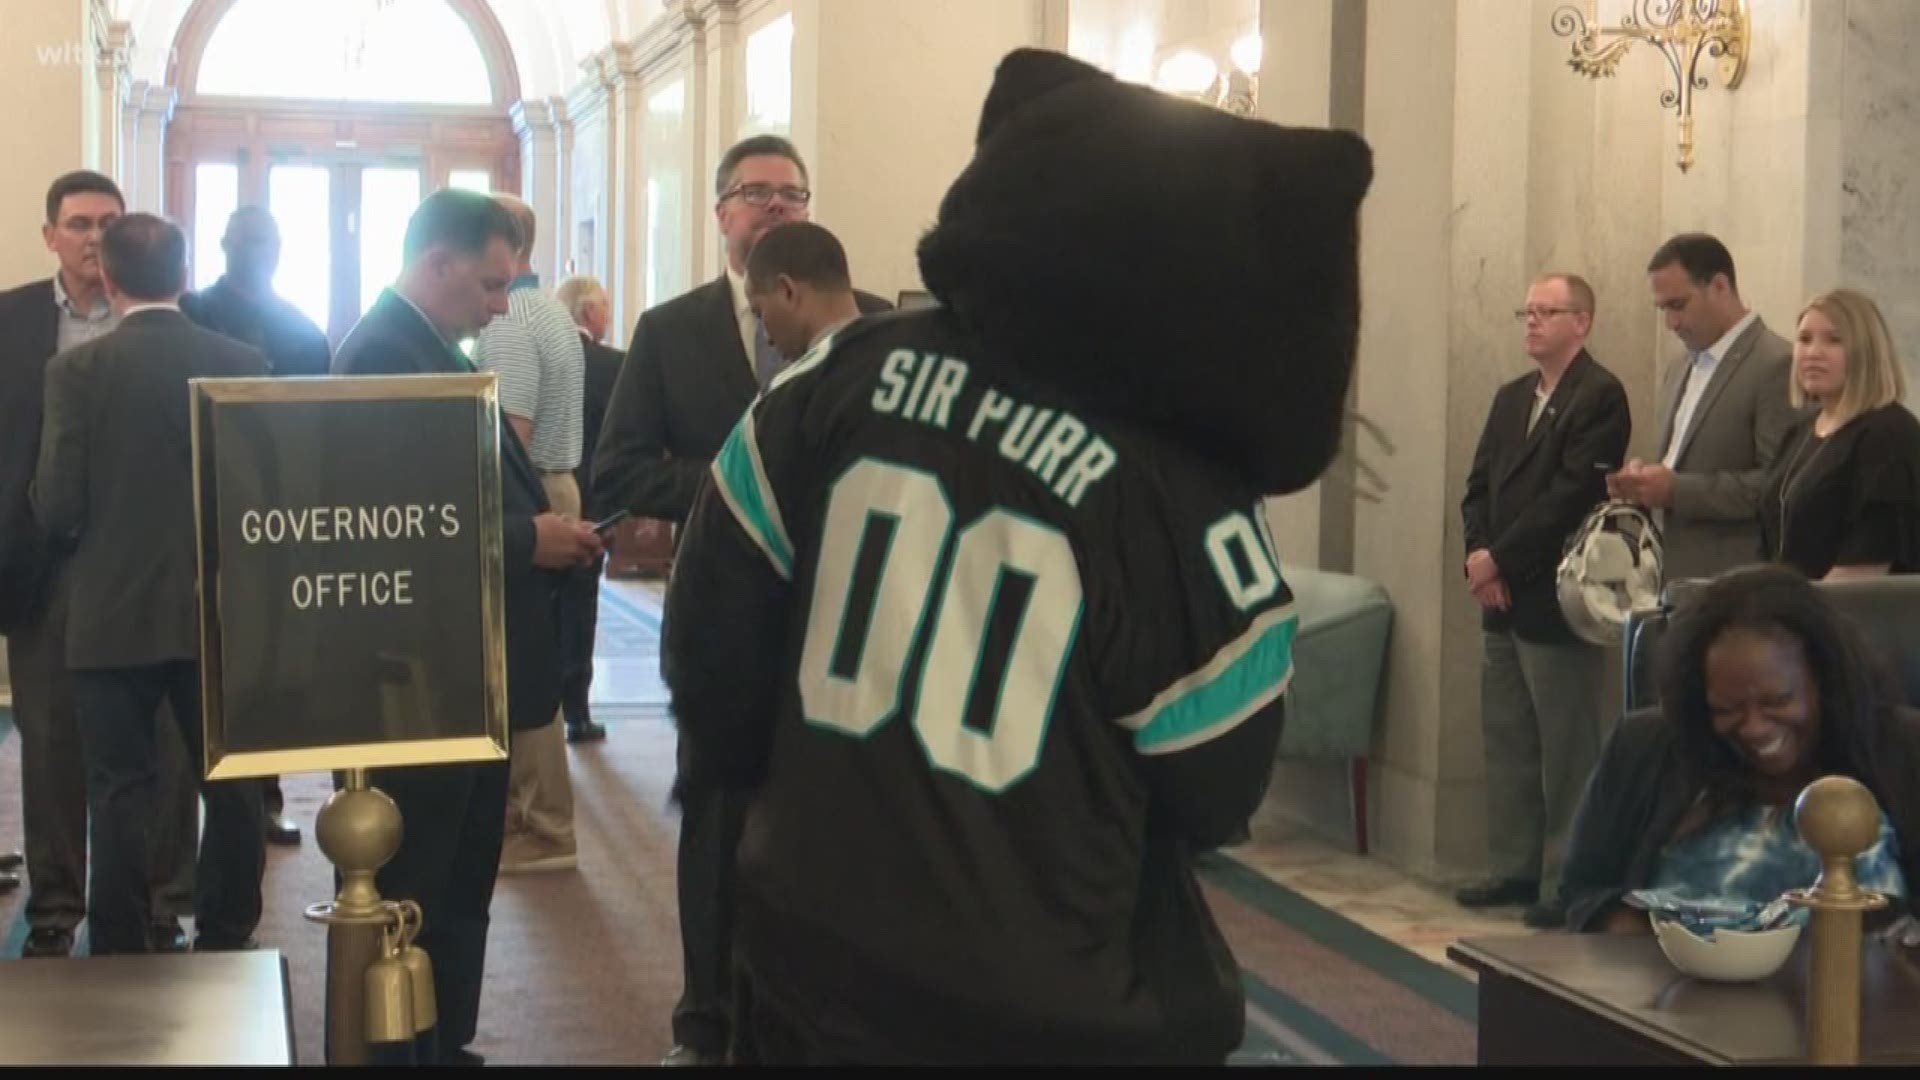 The Carolina Panthers mascot along with several key members of the team met with Gov. McMaster and legislators